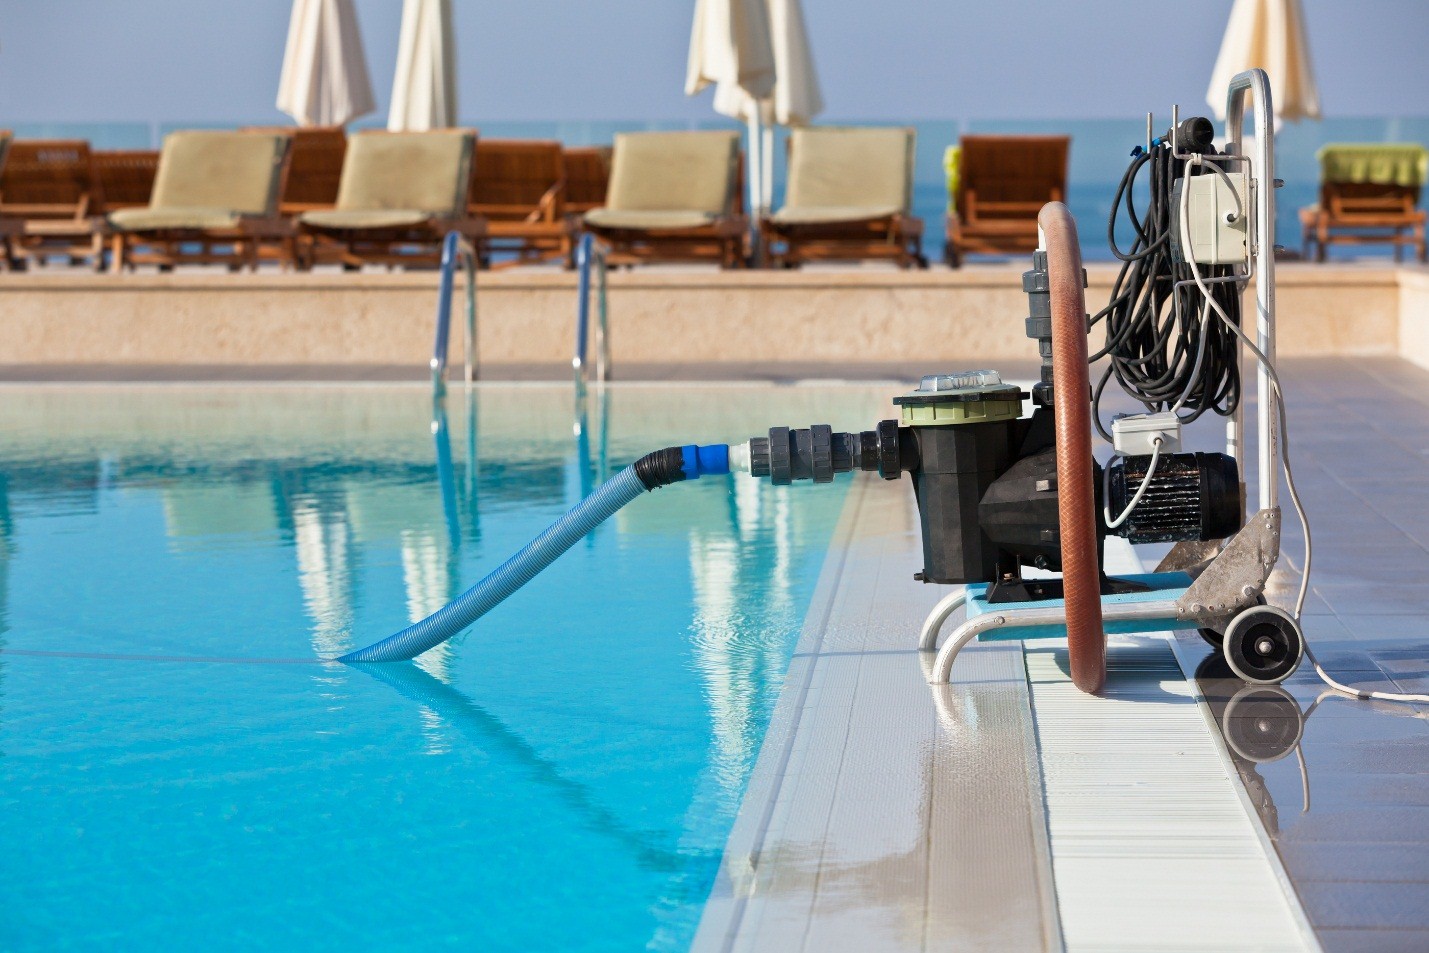 Top Reasons to Buy Pool Pumps that Stay Quiet